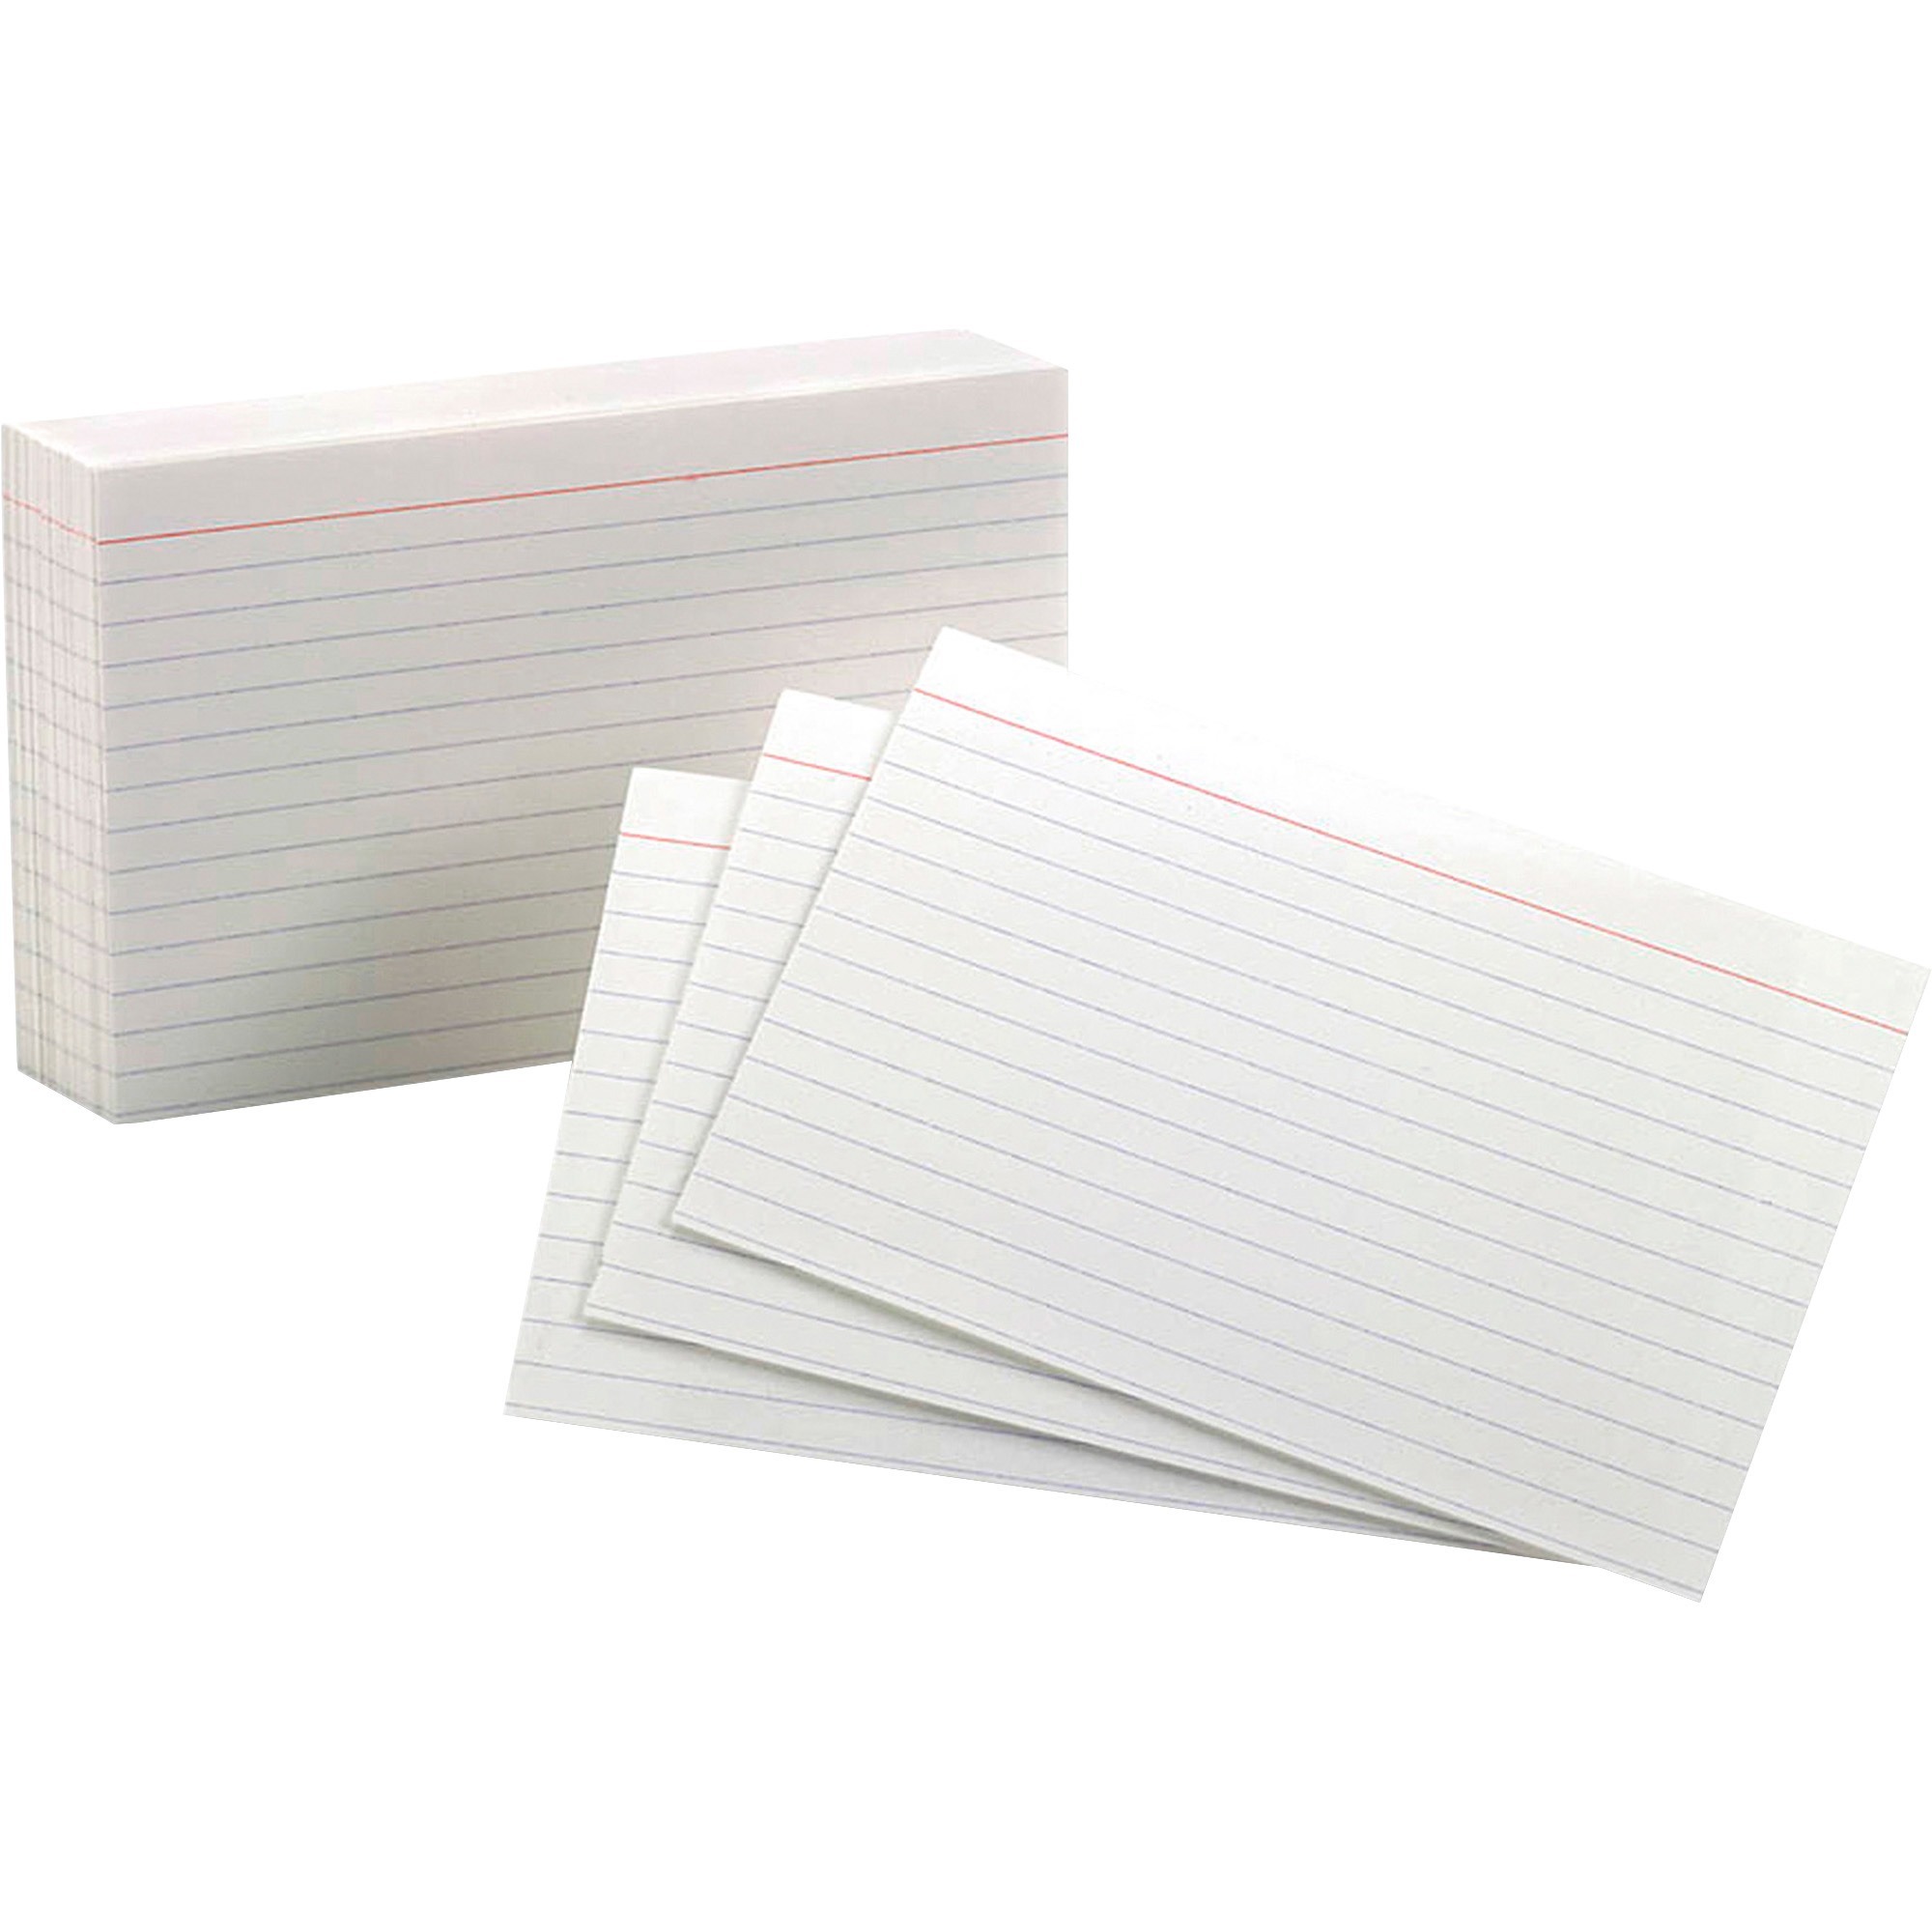 Oxford Unruled Index Cards, 4 x 6, White, 100/Pack (OXF40)